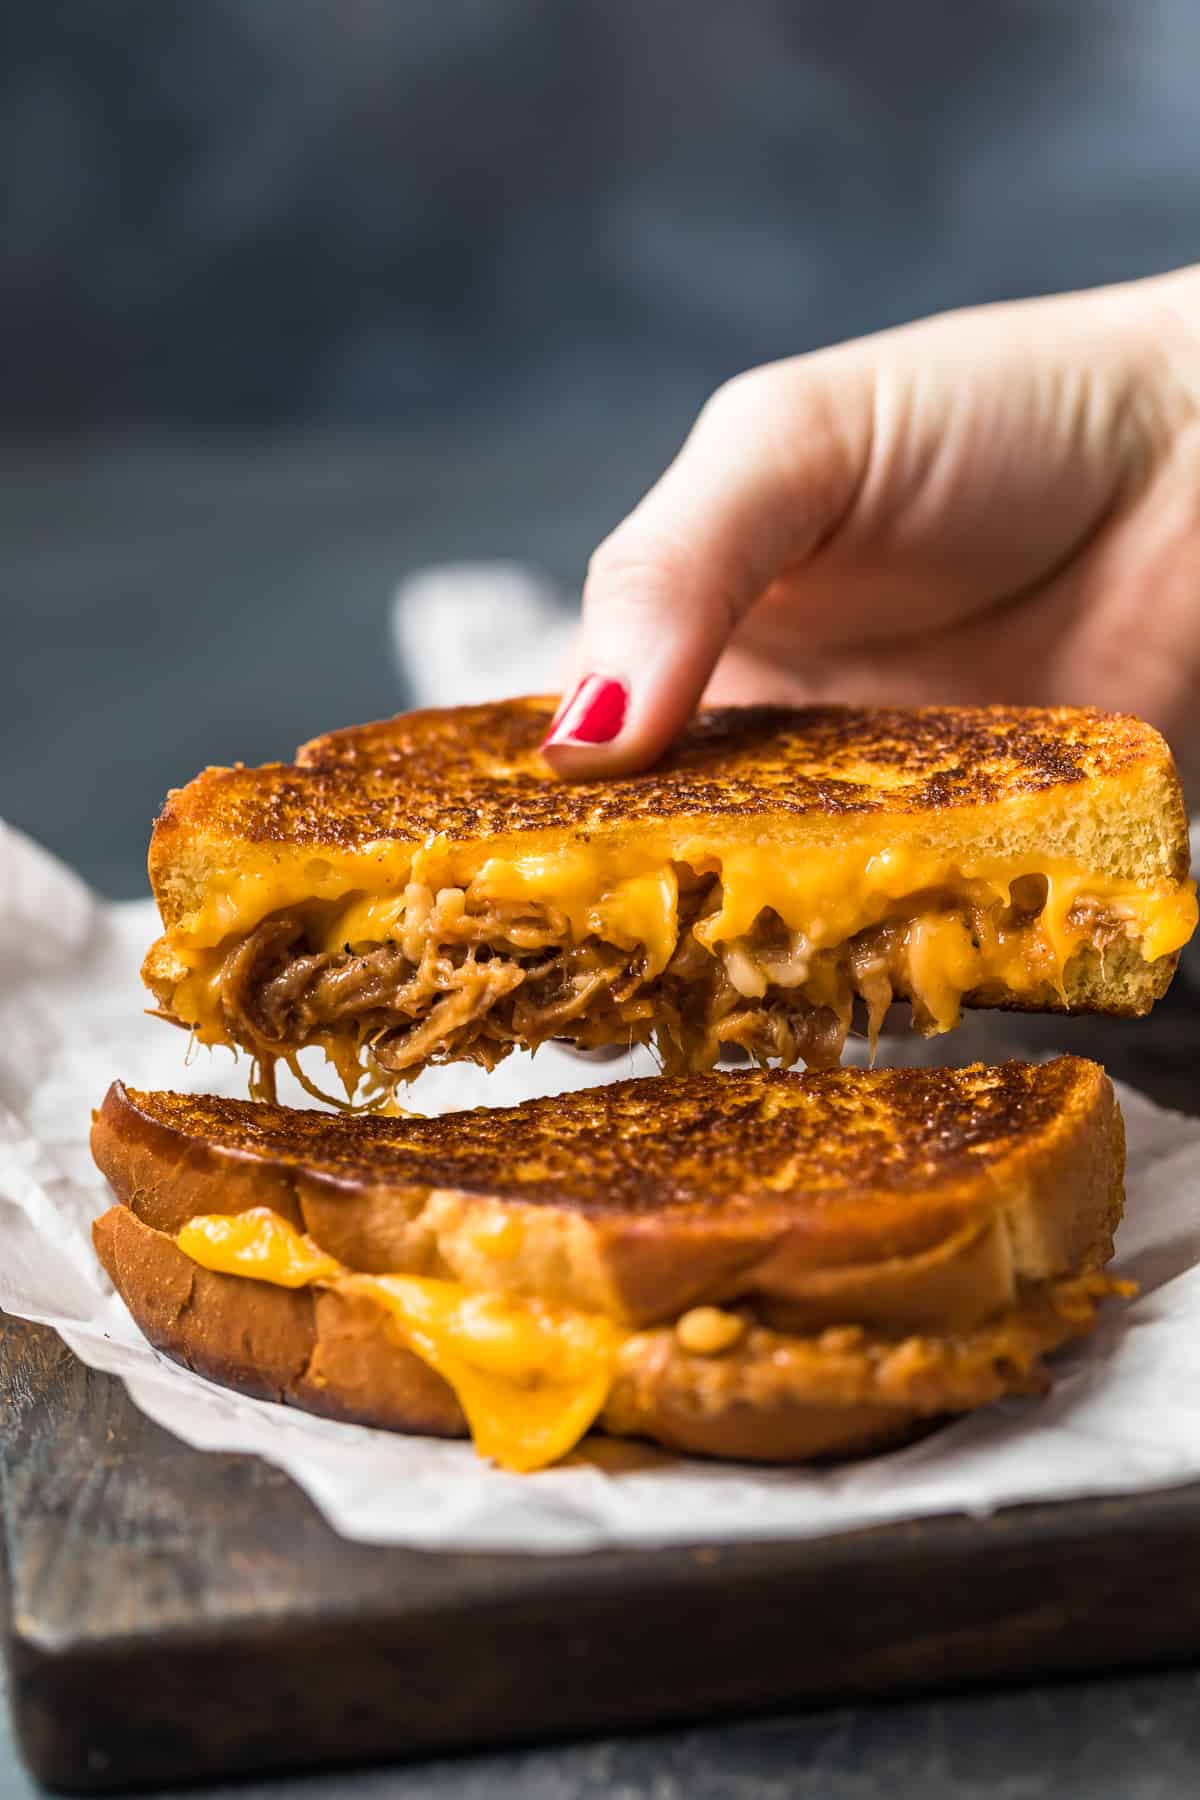 https://www.thecookierookie.com/wp-content/uploads/2020/03/pulled-pork-grilled-cheese-sandwich-3-of-11.jpg